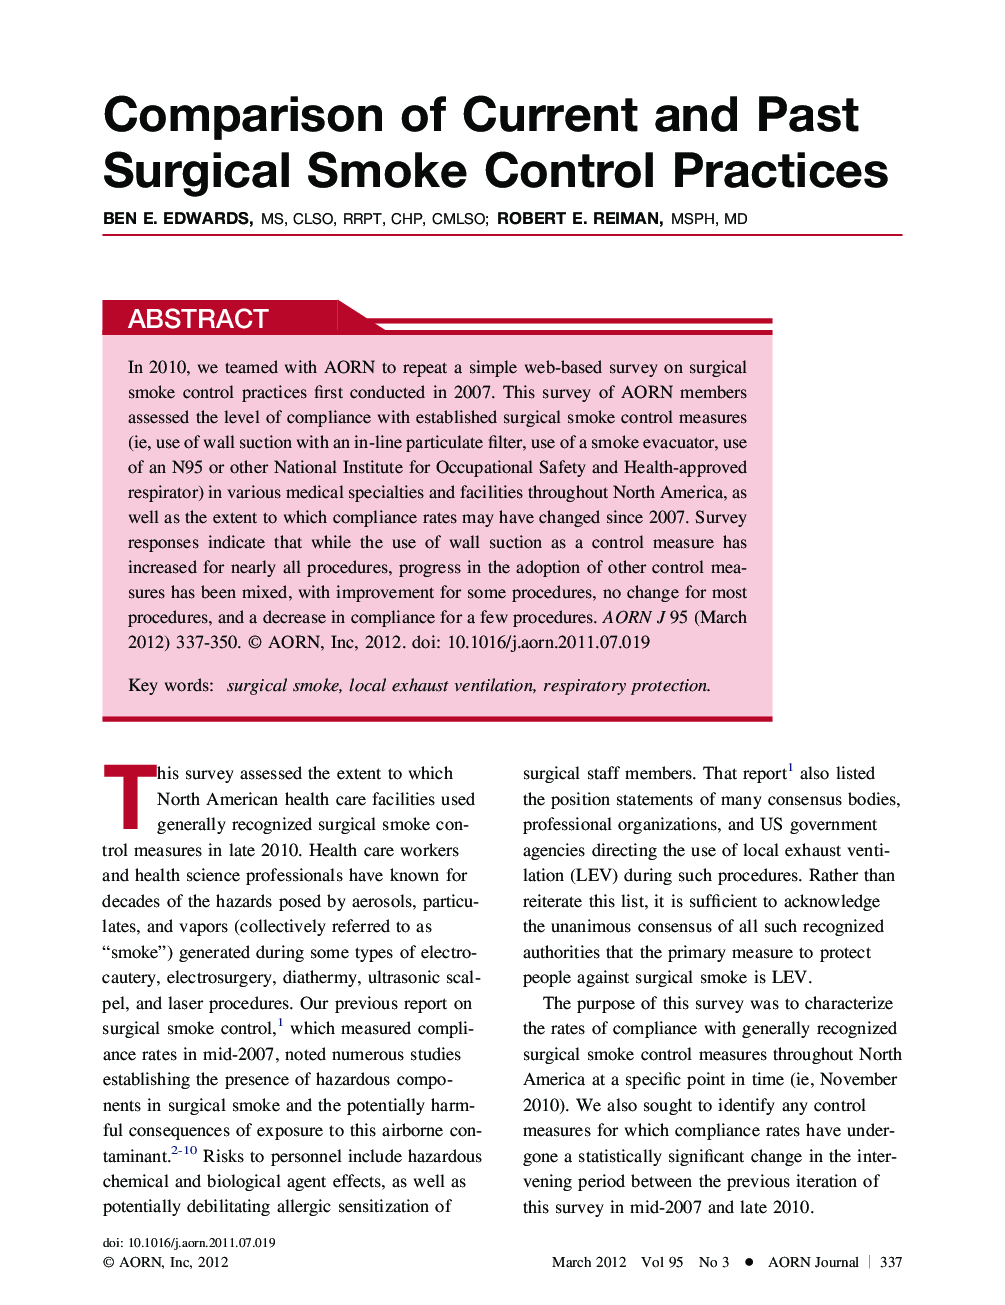 Comparison of Current and Past Surgical Smoke Control Practices